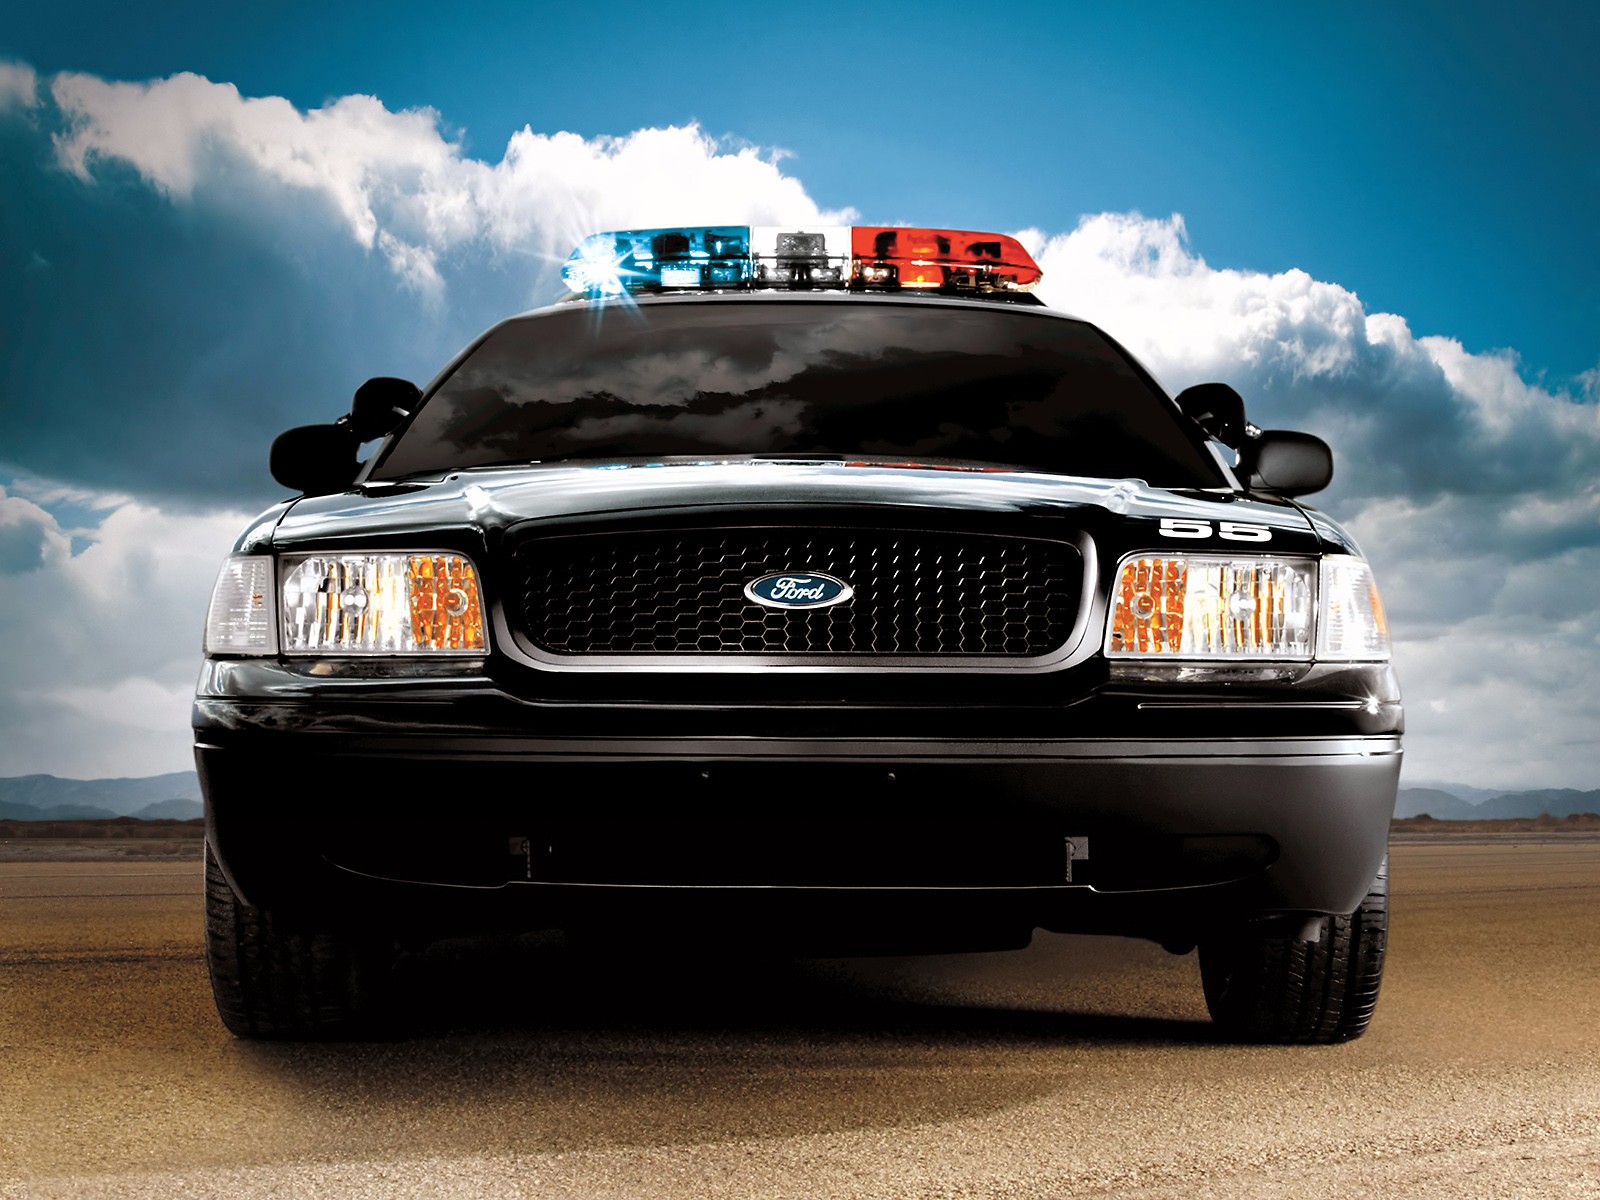 Ford Crown Vic Police Interceptor Gives Up Policing for the Hollywood